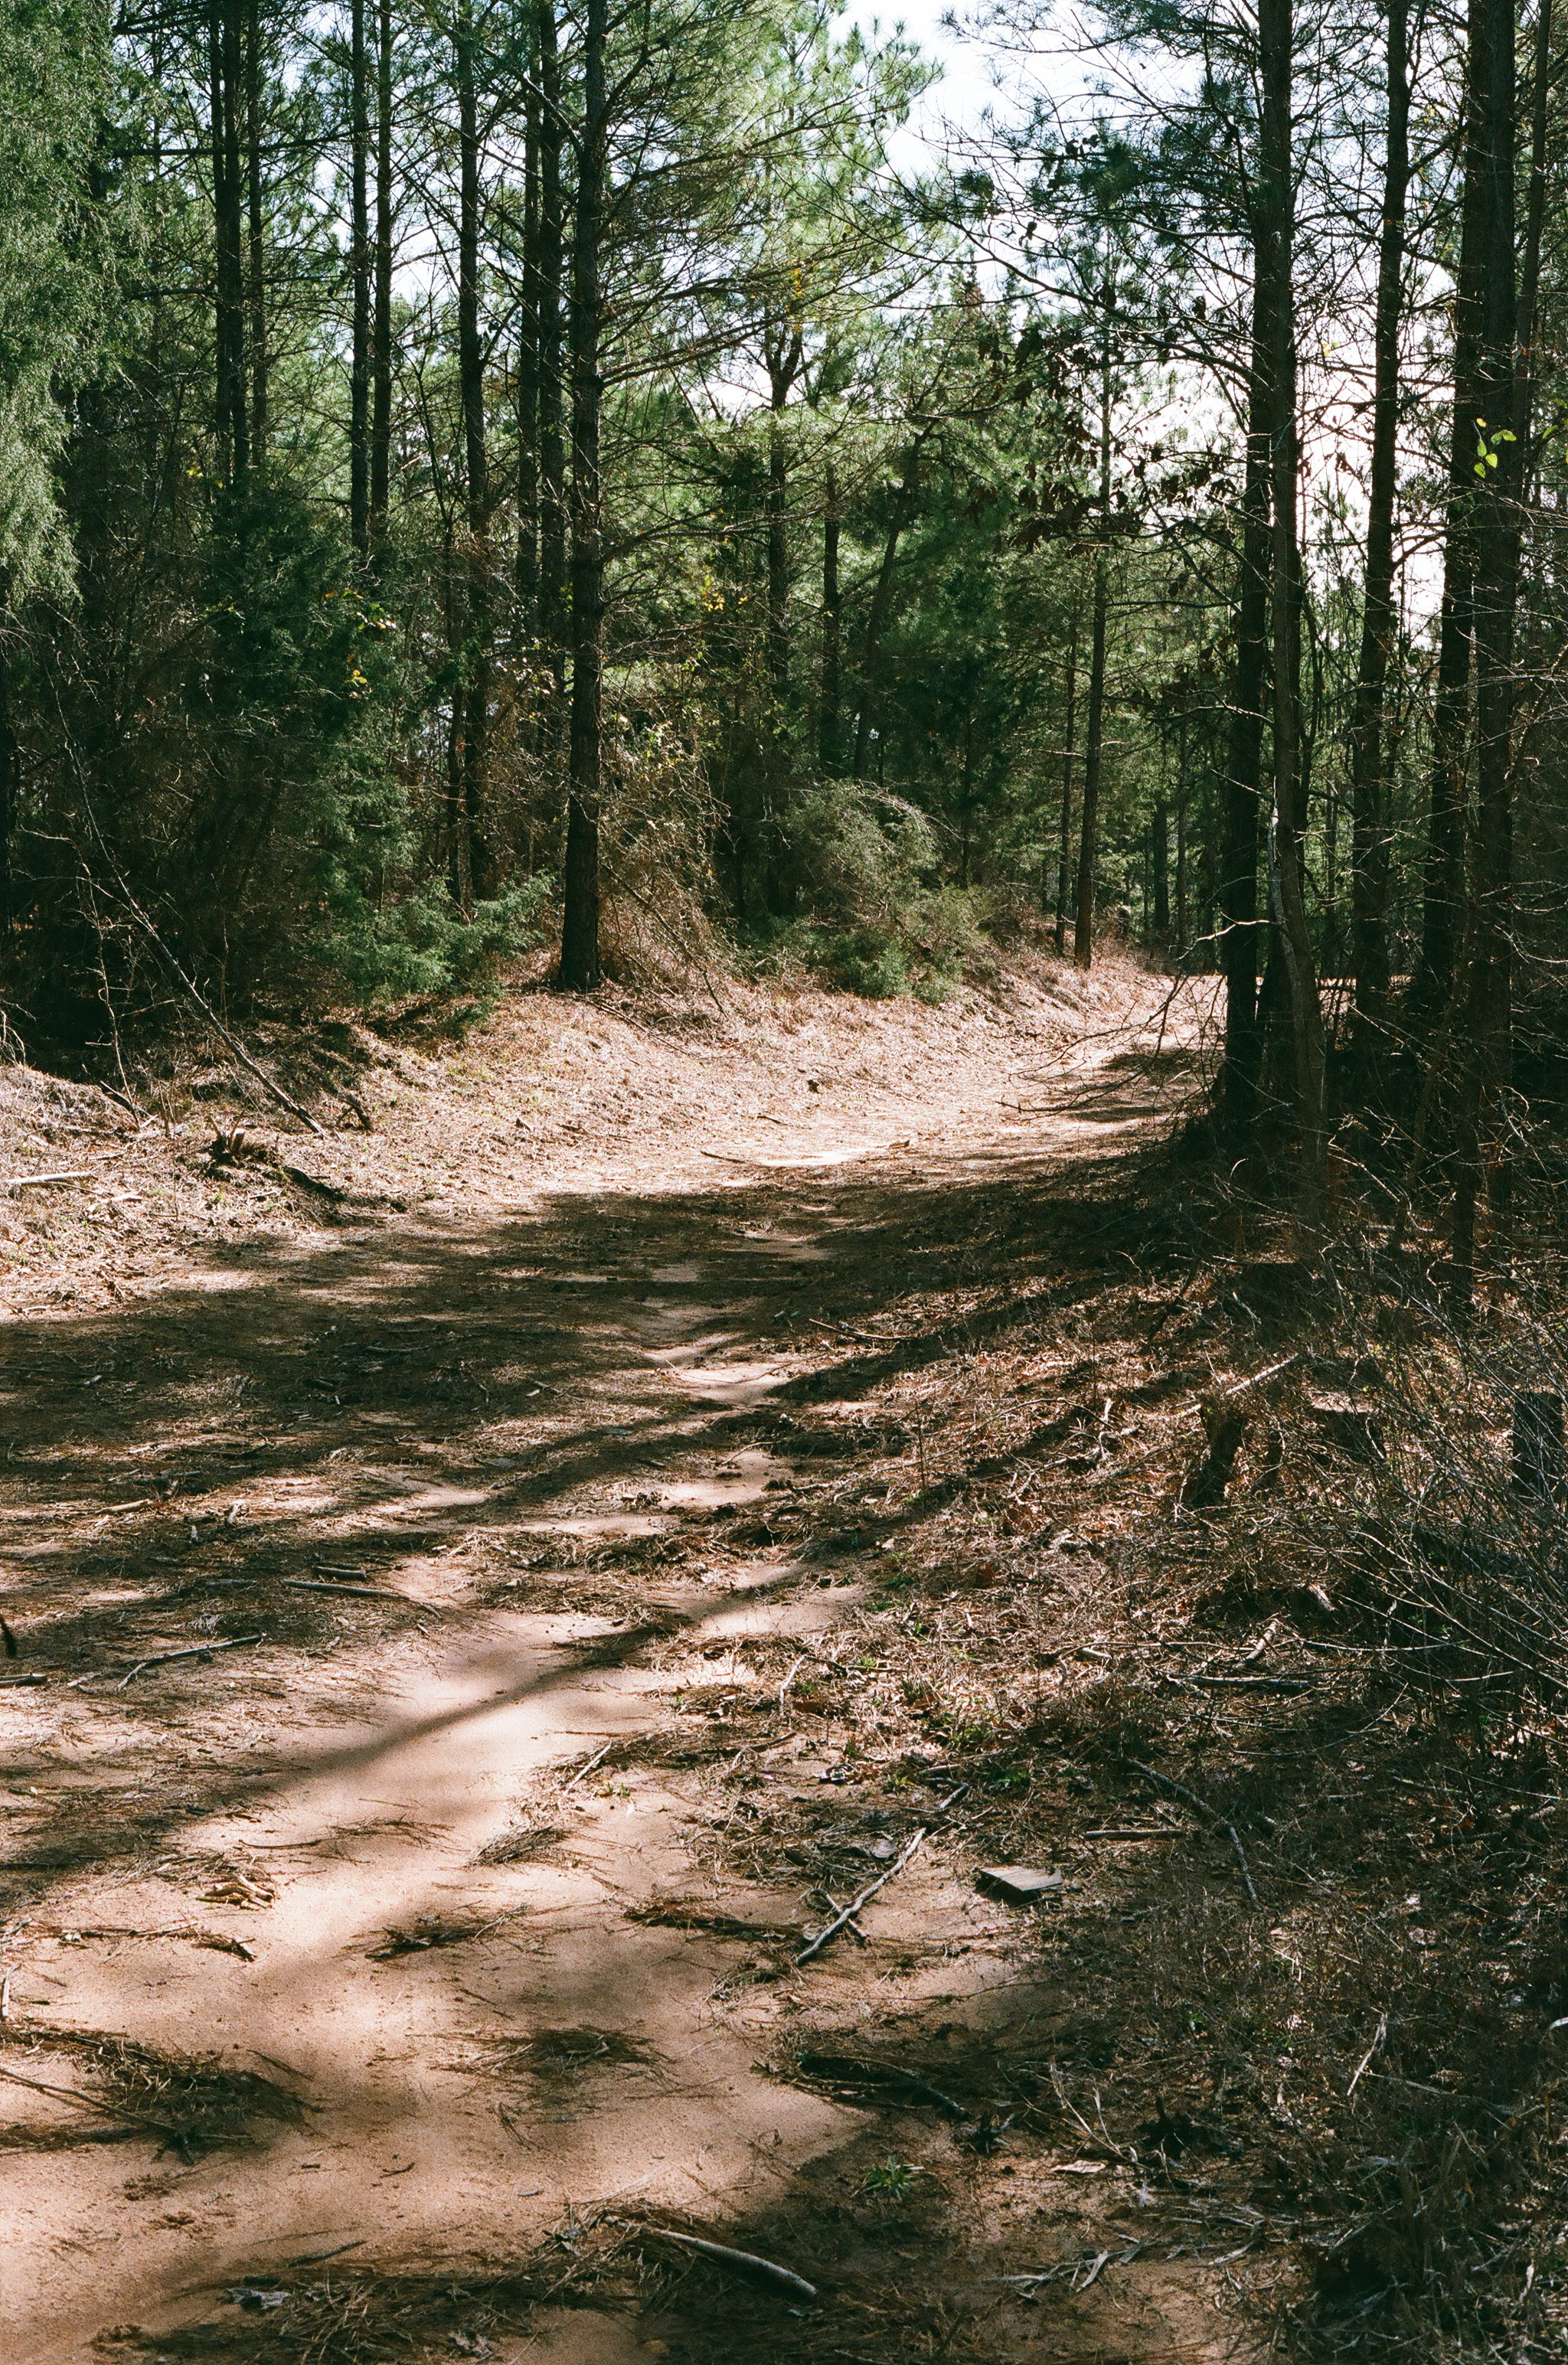  The film has pretty good dynamic range as seen in this bright and shady logging road 